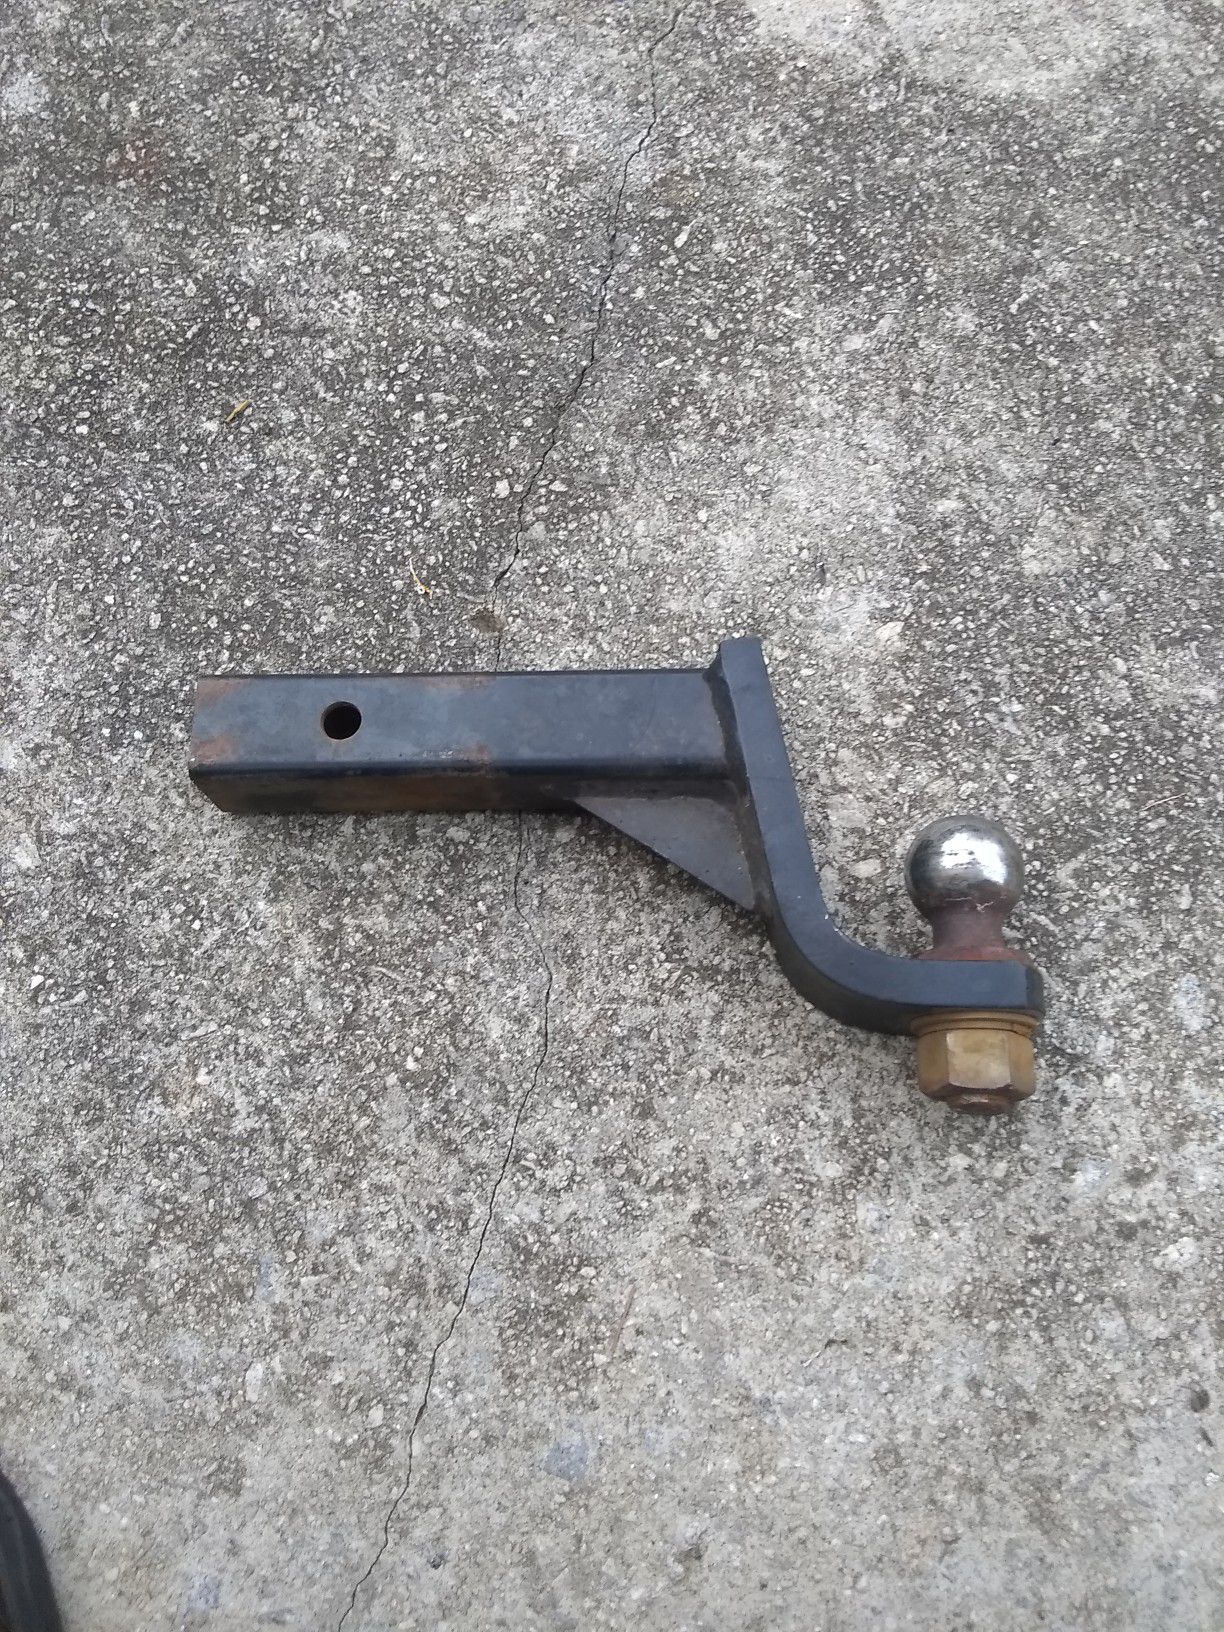 Tow hitch with 2-inch ball, 5000 pound towing capacity